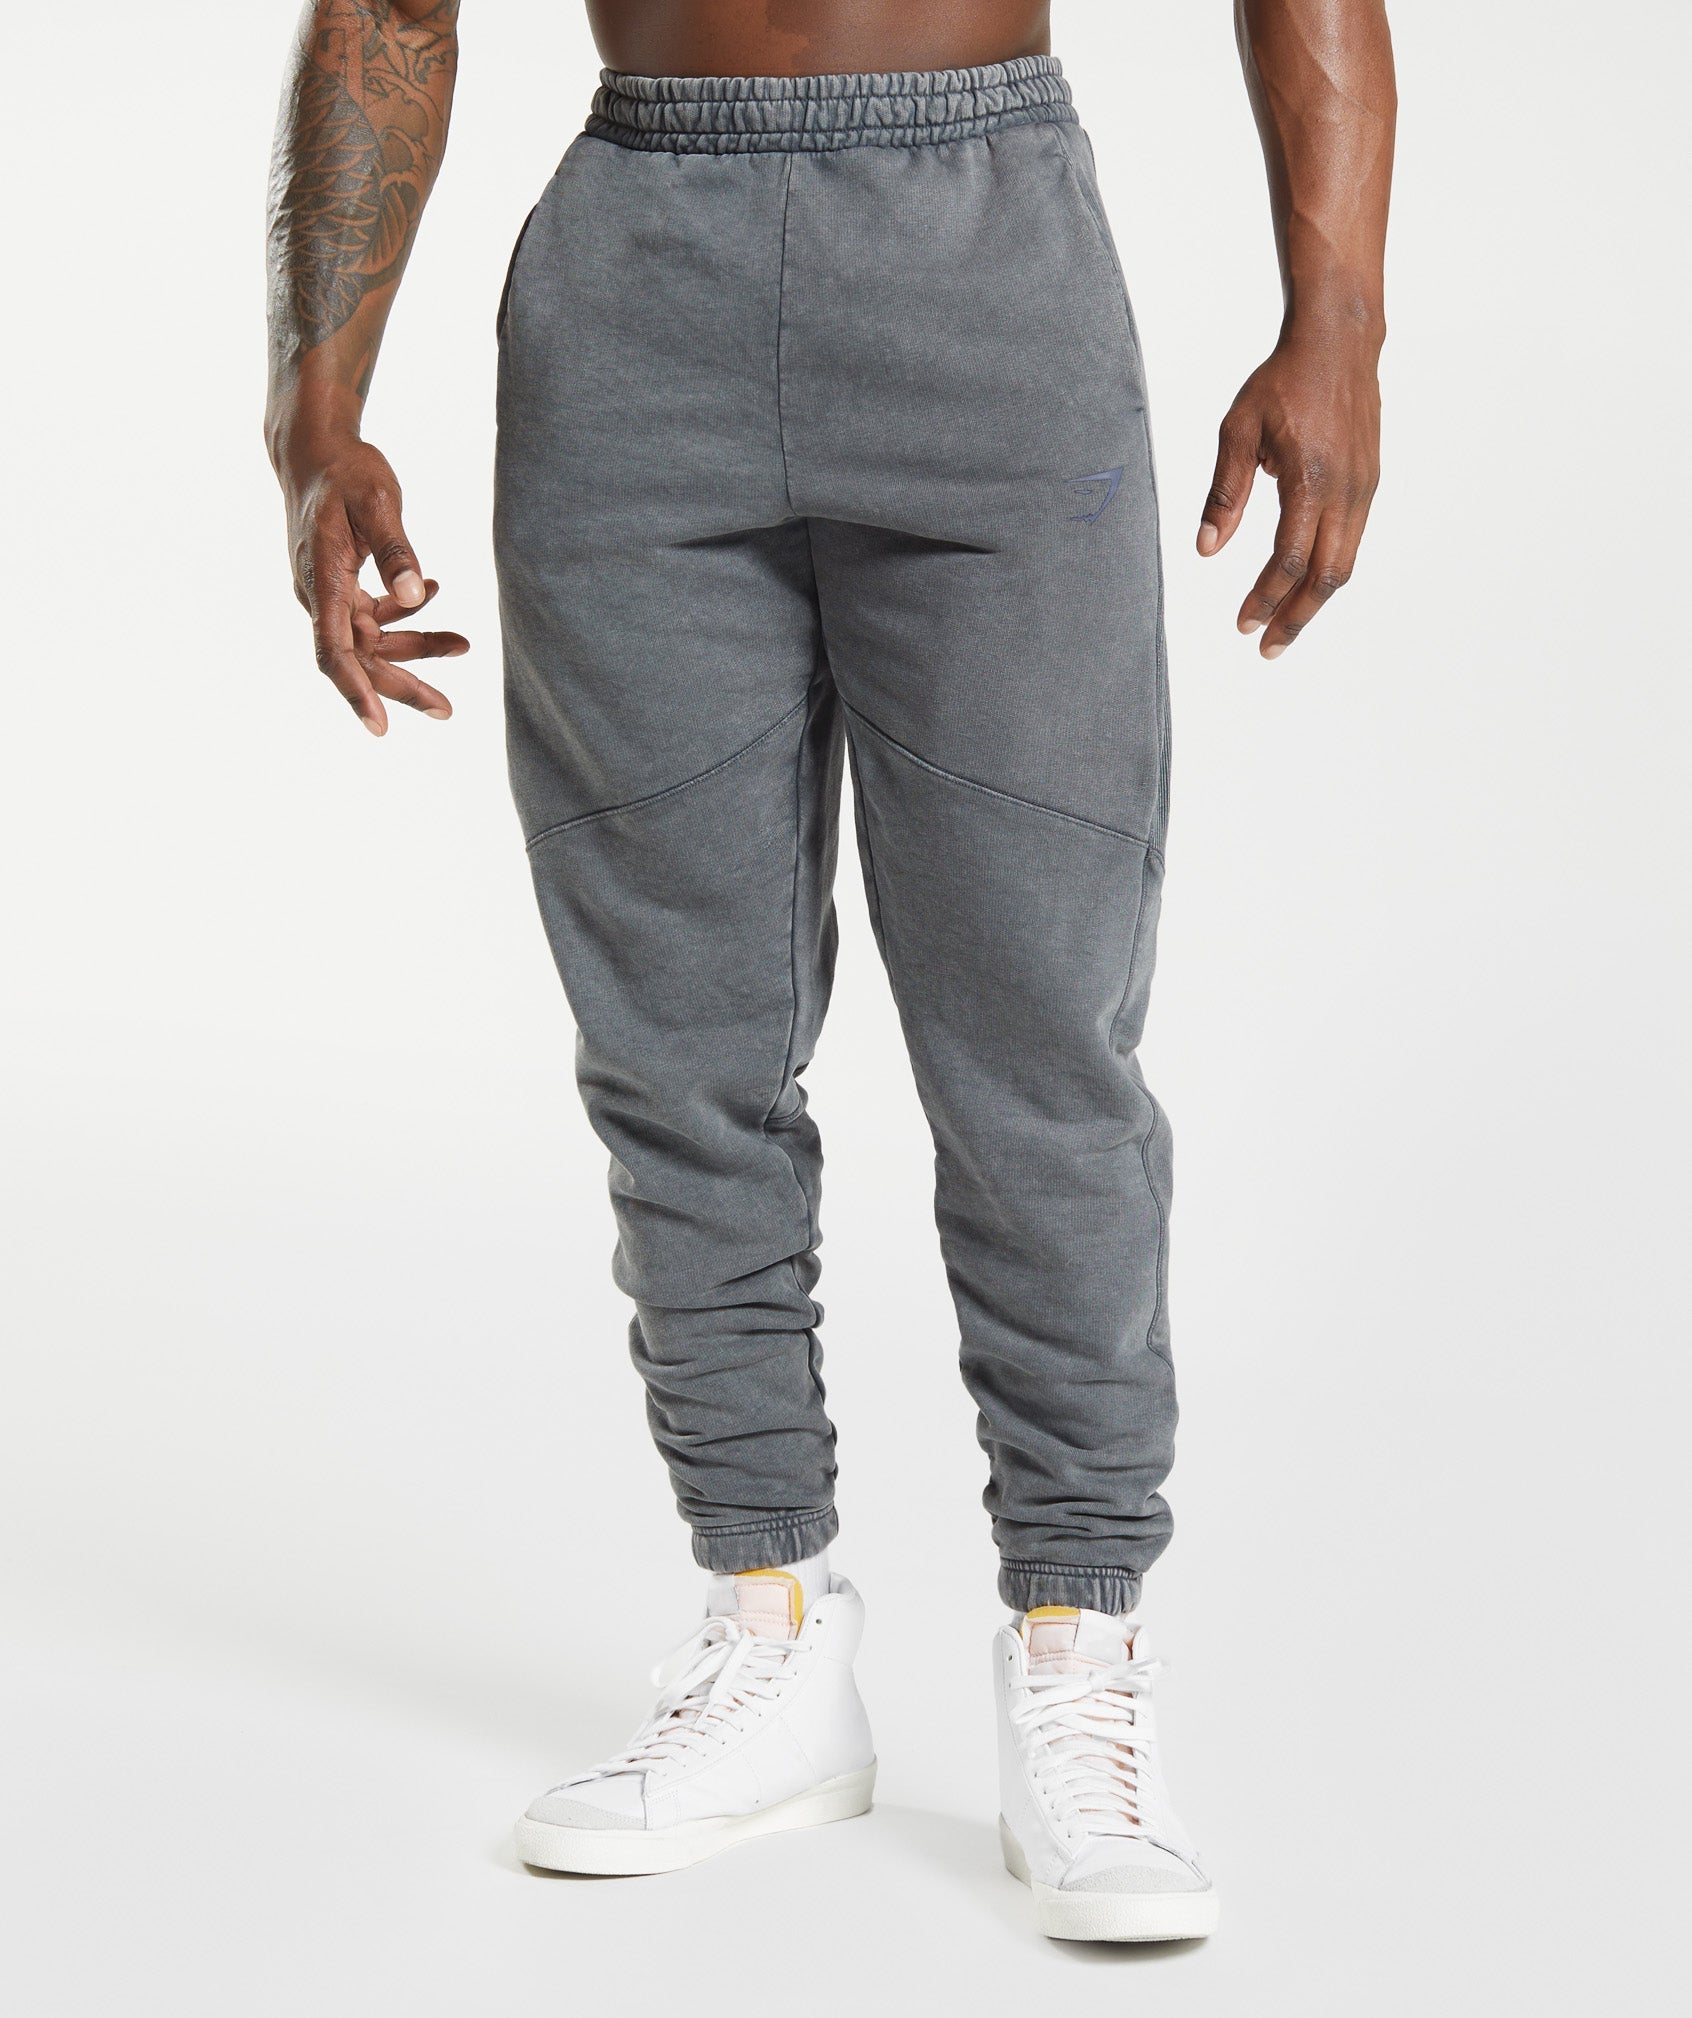 Gymshark Power Washed Joggers - Cosmic Grey